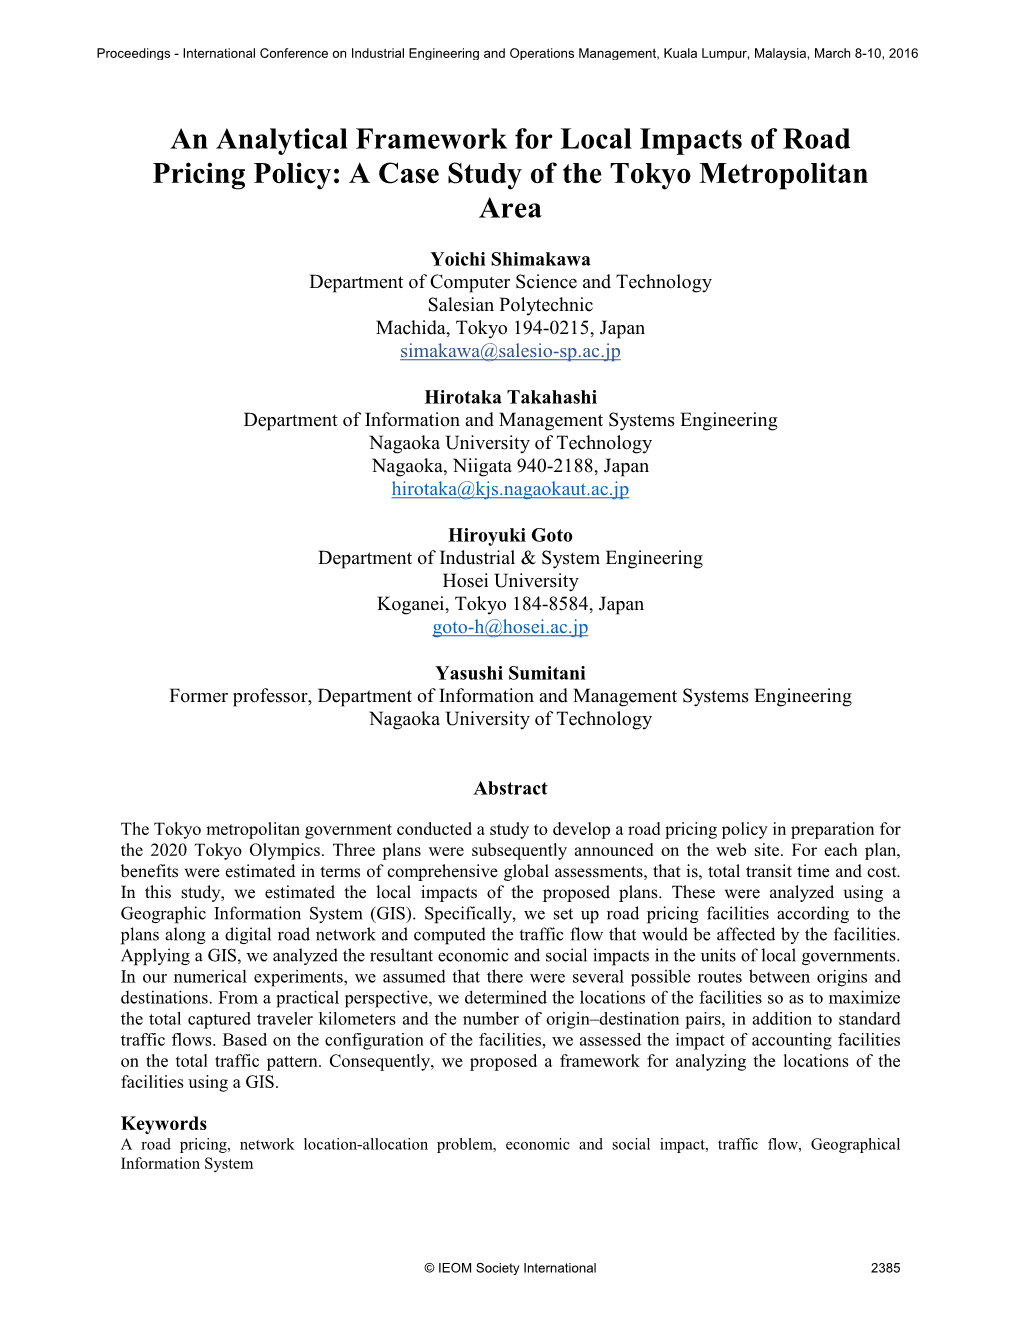 An Analytical Framework for Local Impacts of Road Pricing Policy: a Case Study of the Tokyo Metropolitan Area